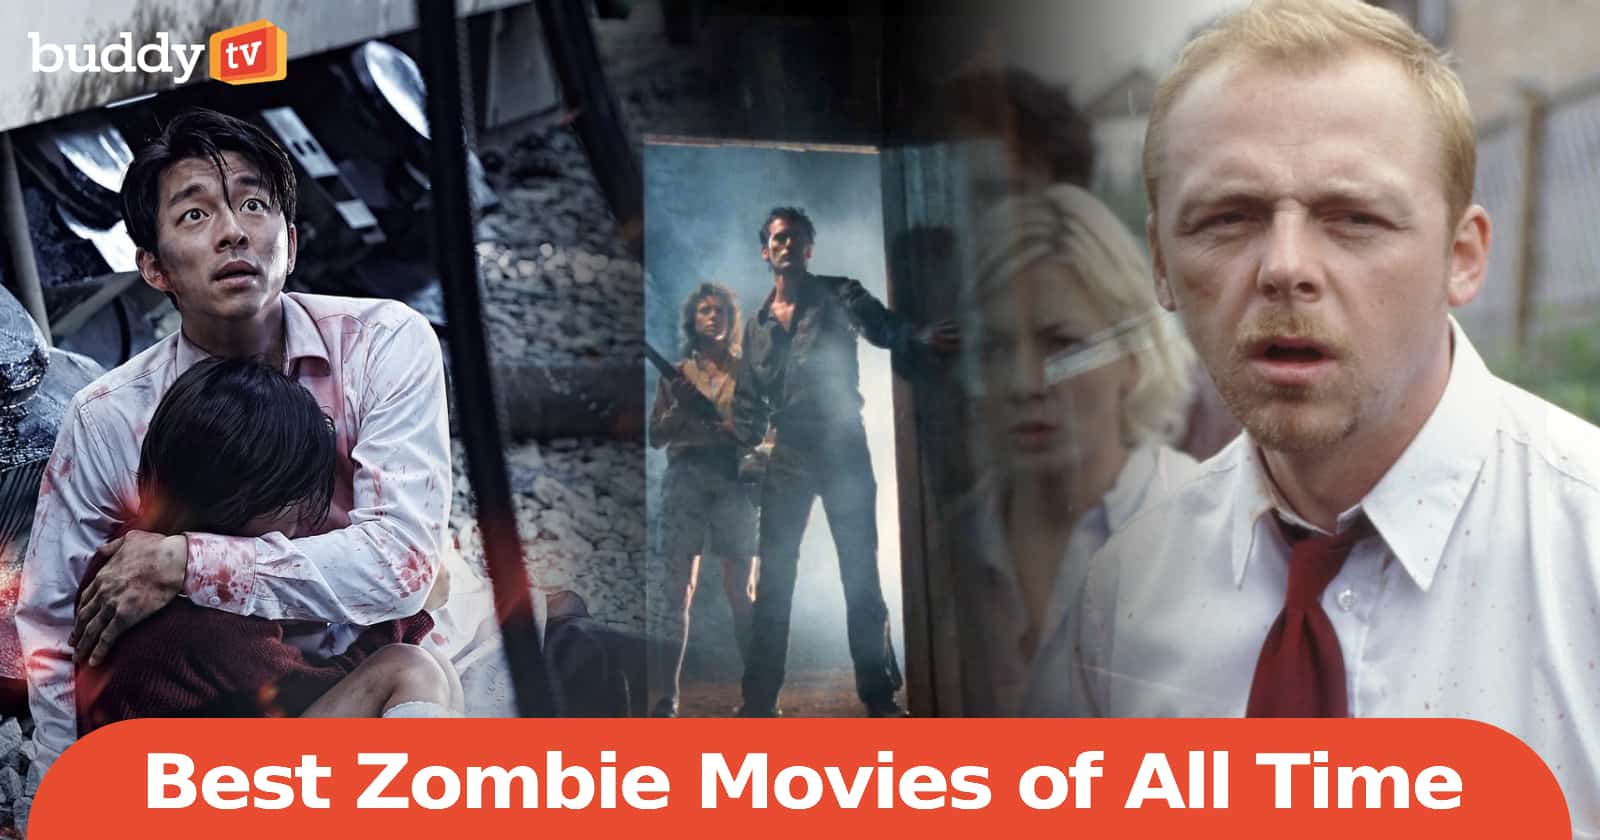 10 Best Zombie Movies of All Time, Ranked by Viewers